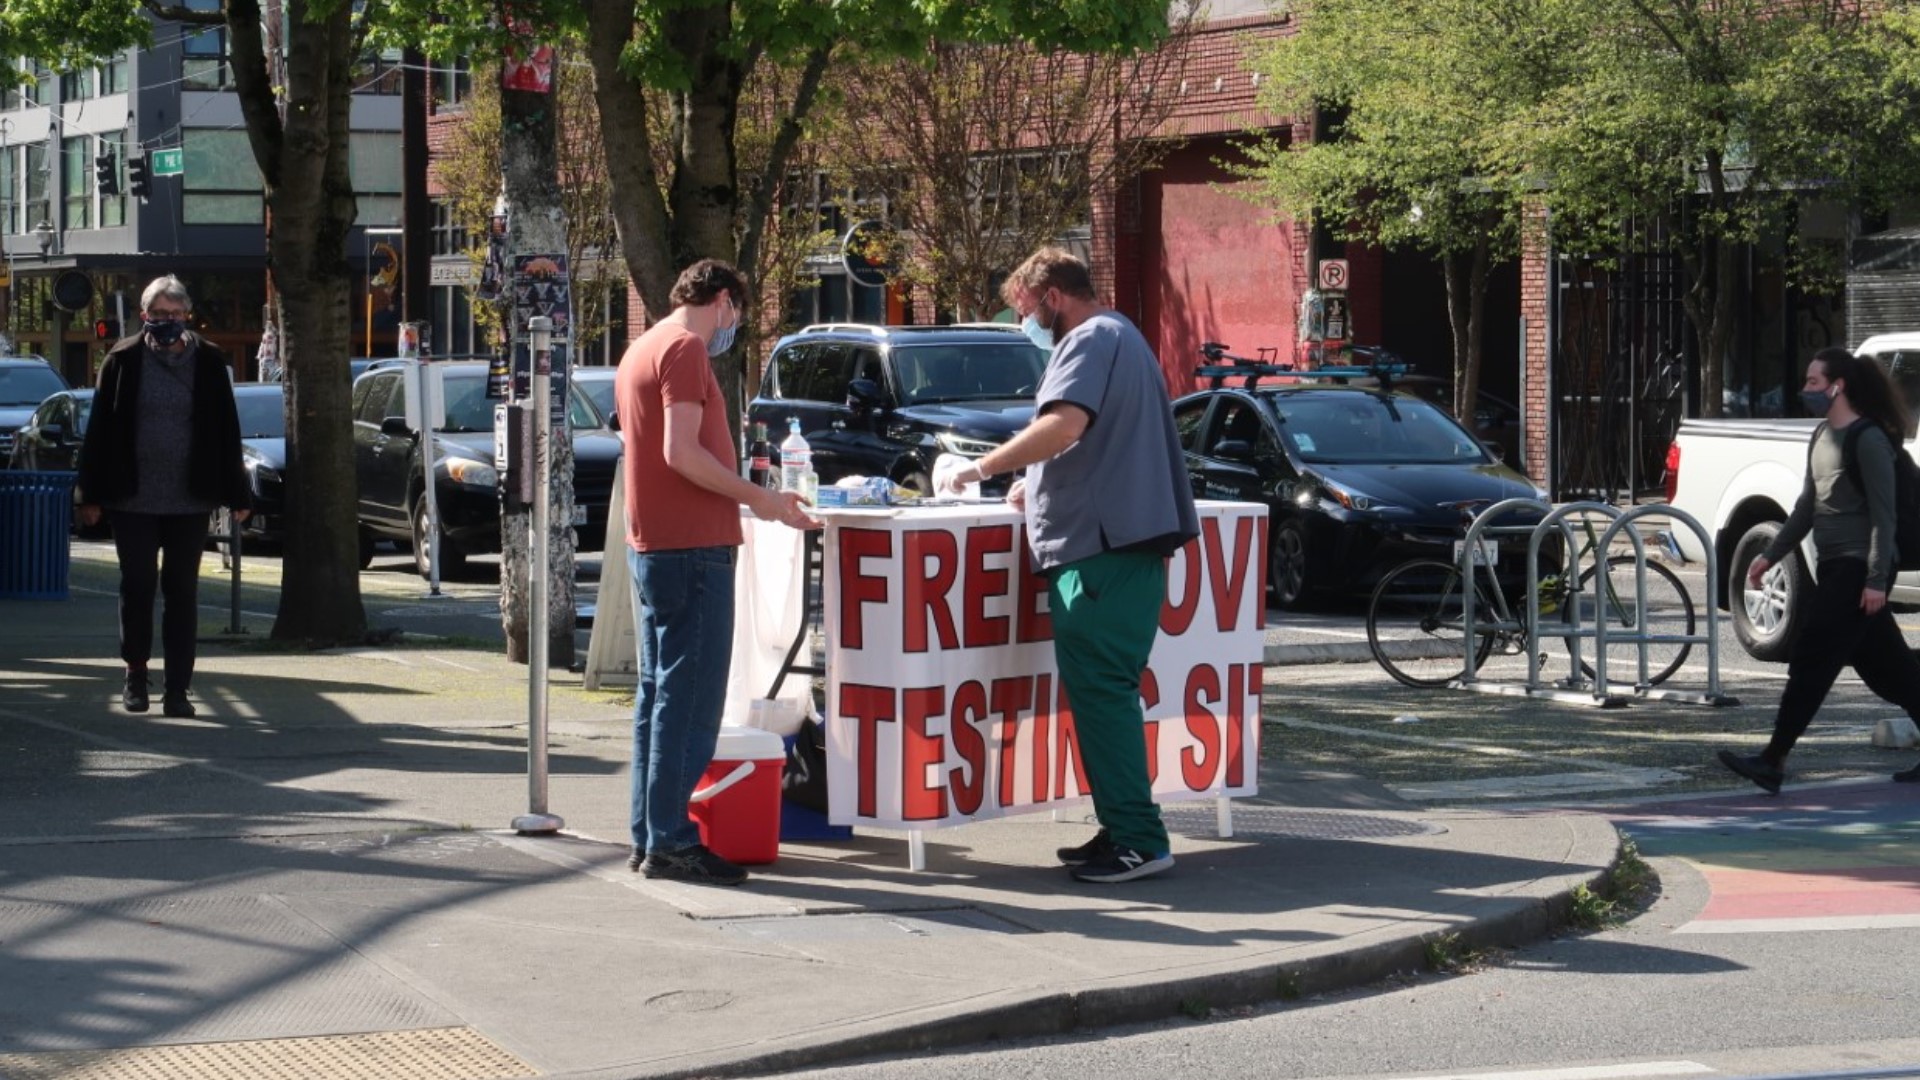 The county received reports of people going door-to-door offering tests, and a California company has also set up pop-up locations at parks and sidewalks.